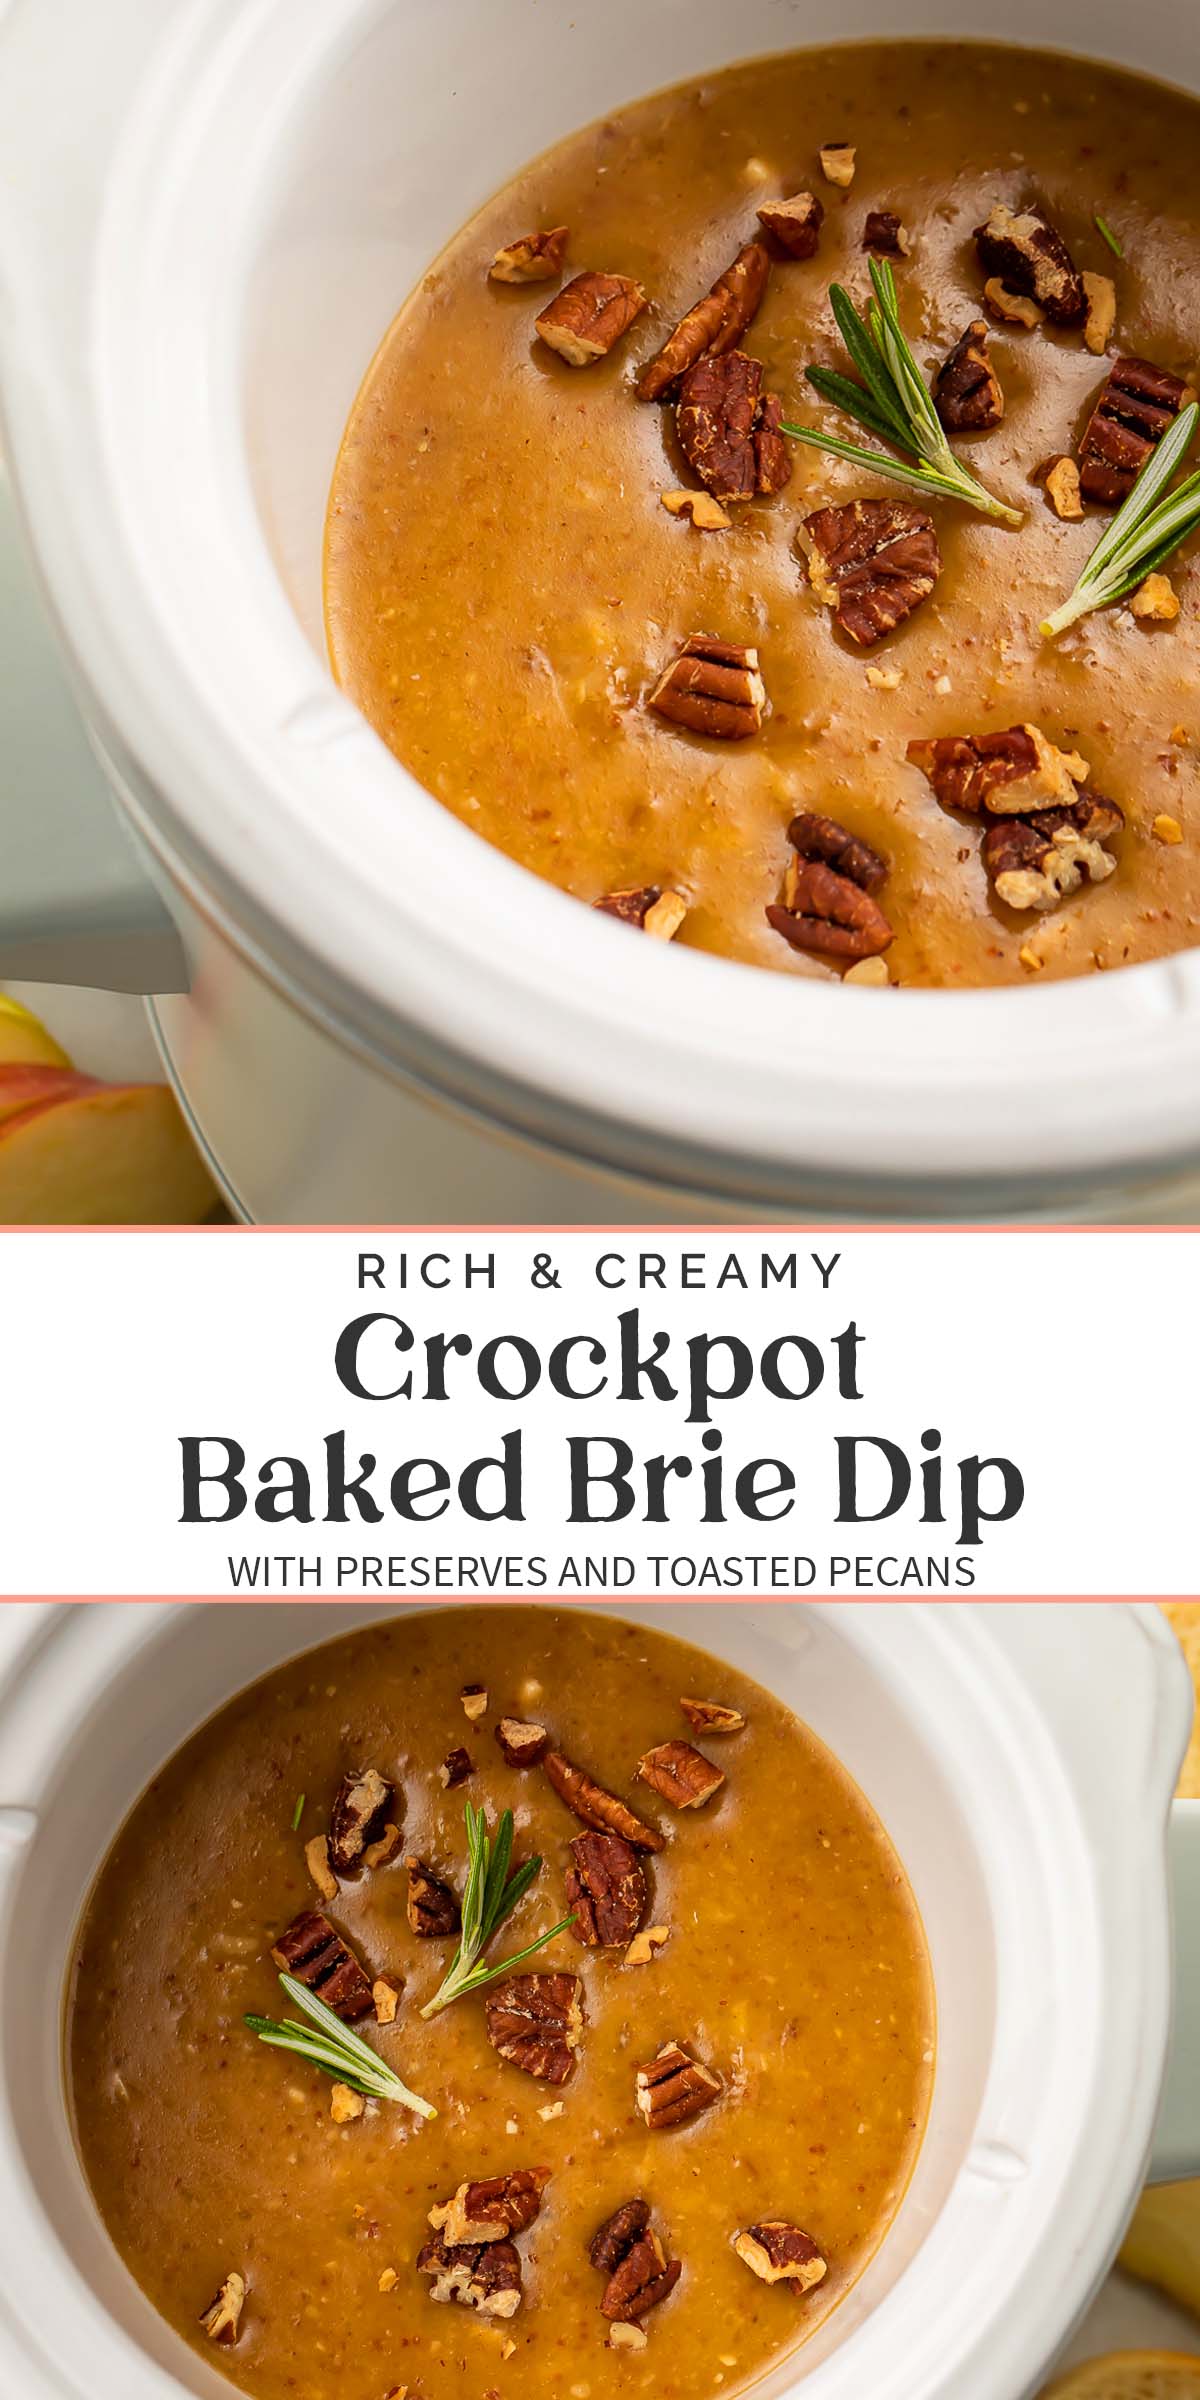 Pin graphic for Crockpot baked brie dip.